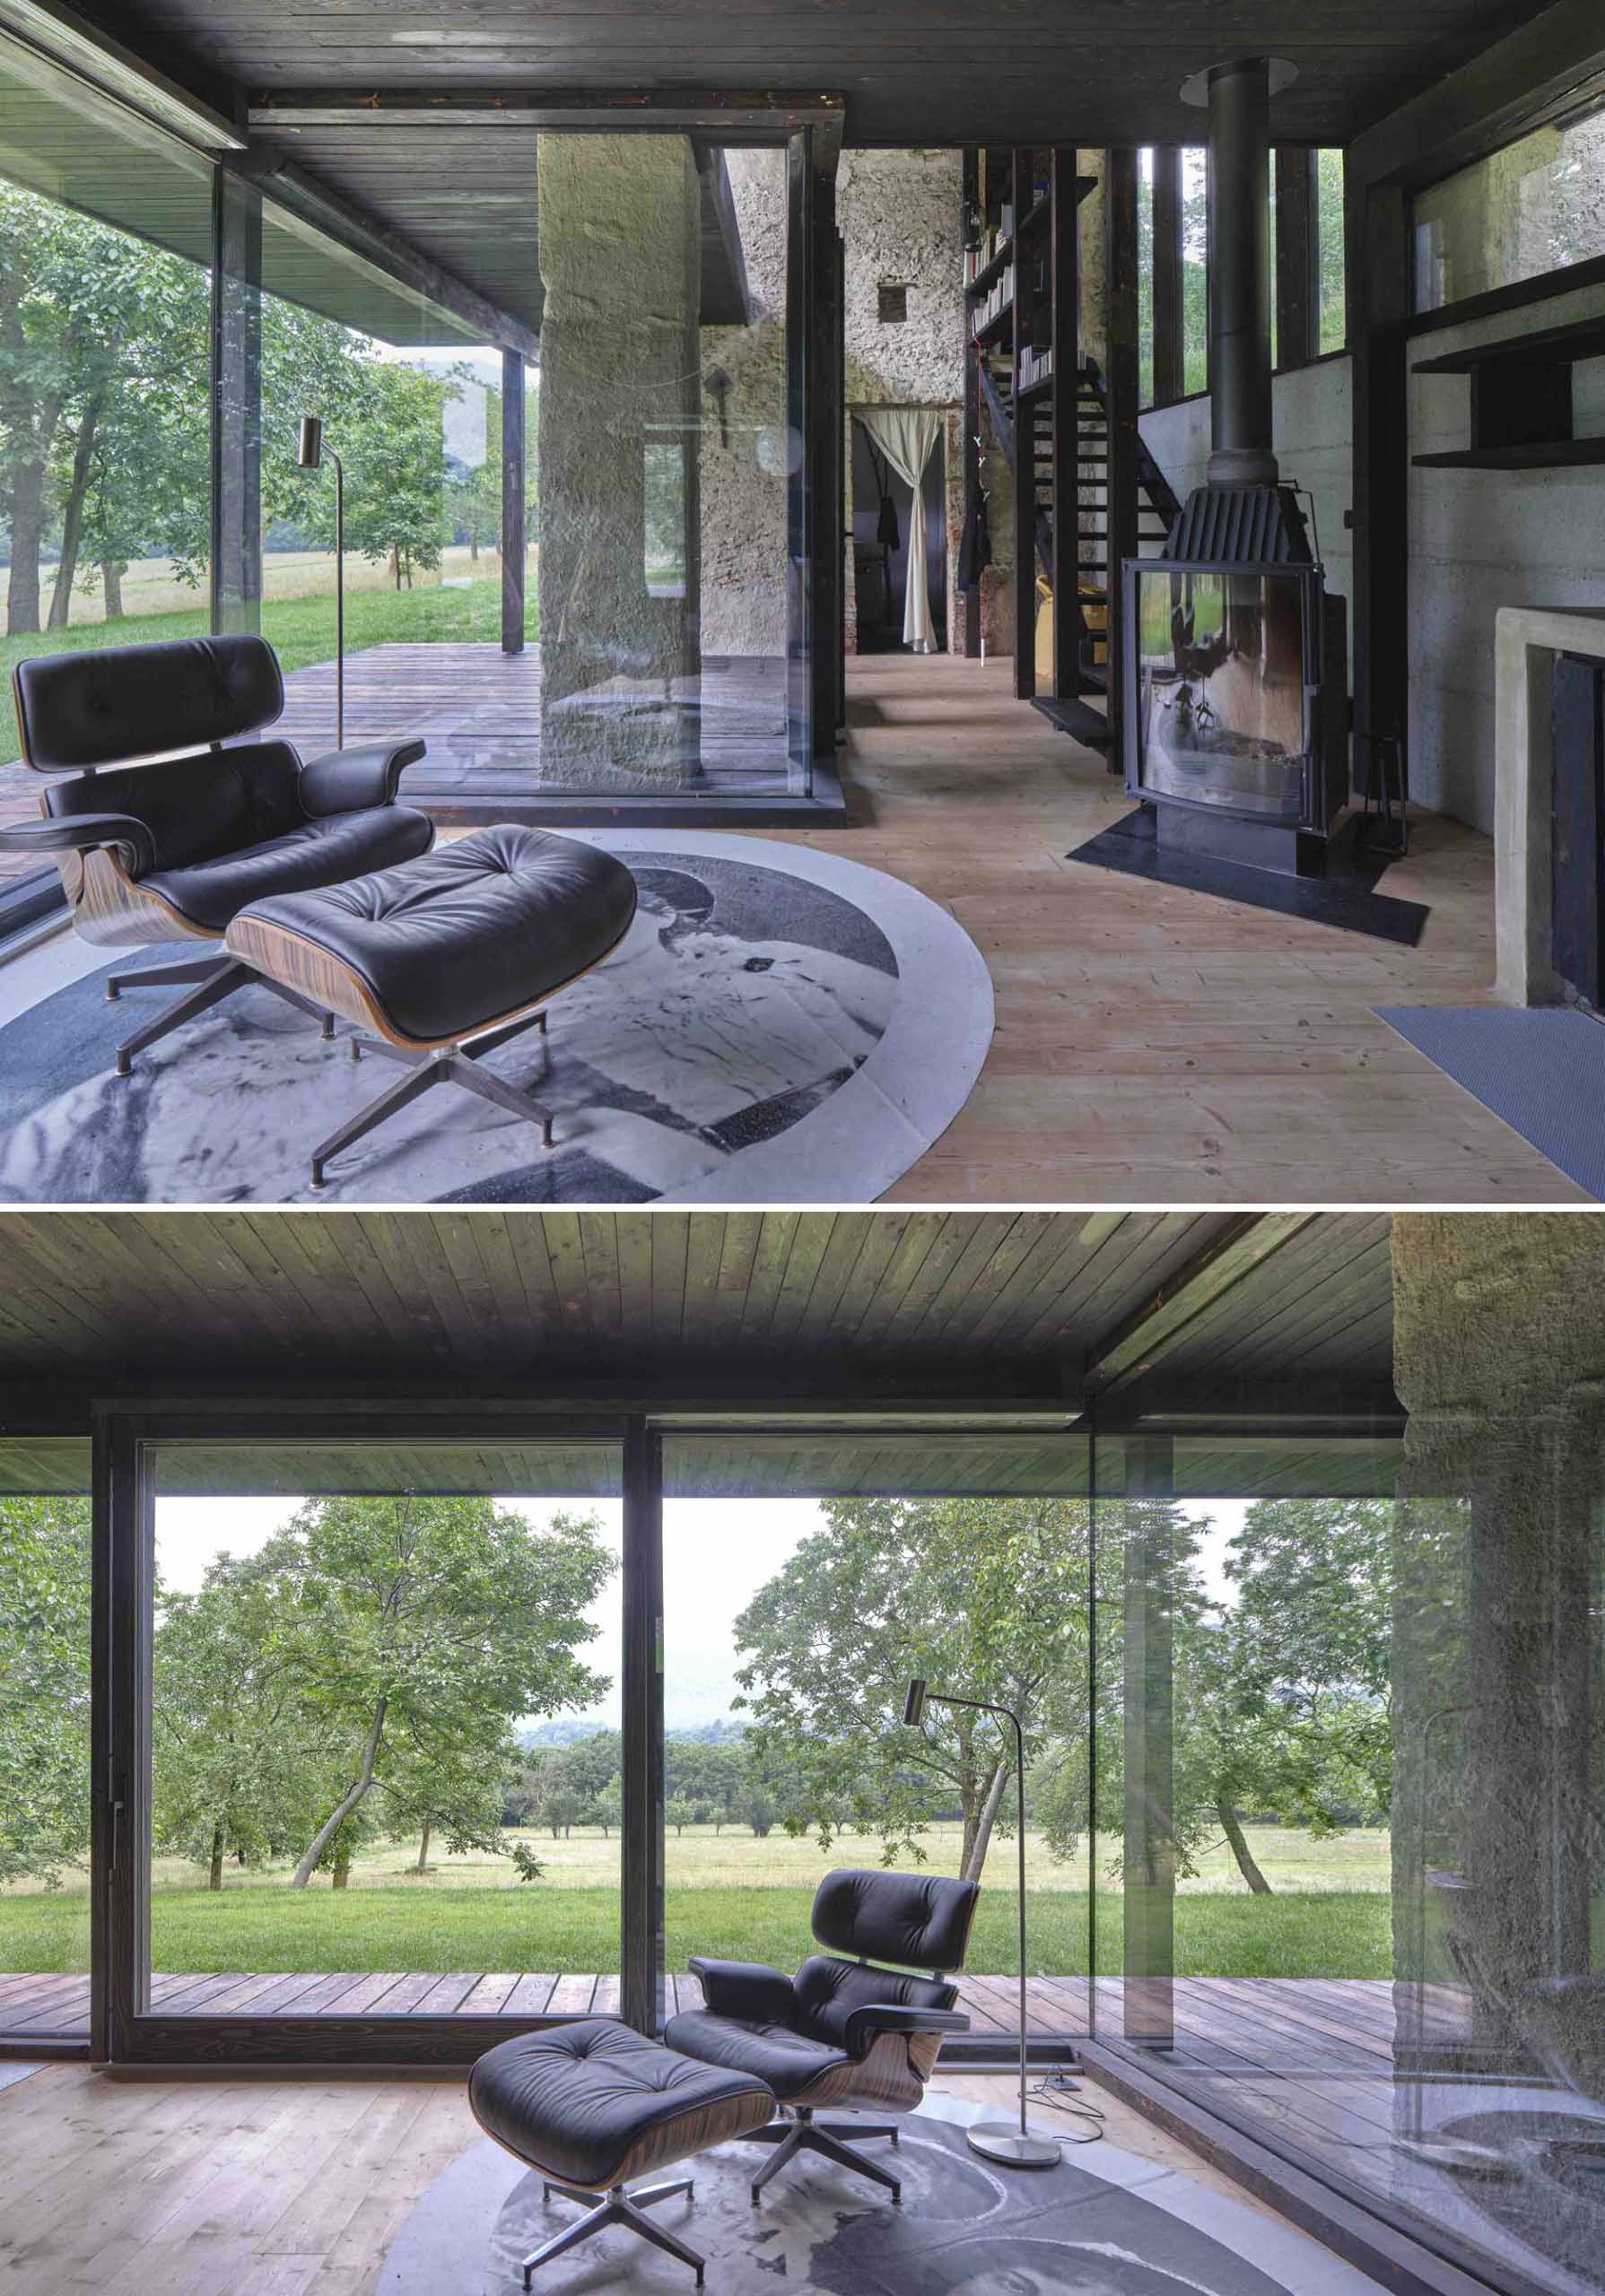 A small off-grid home with burnt larch wood and large windows, includes a sitting area with a fireplace.